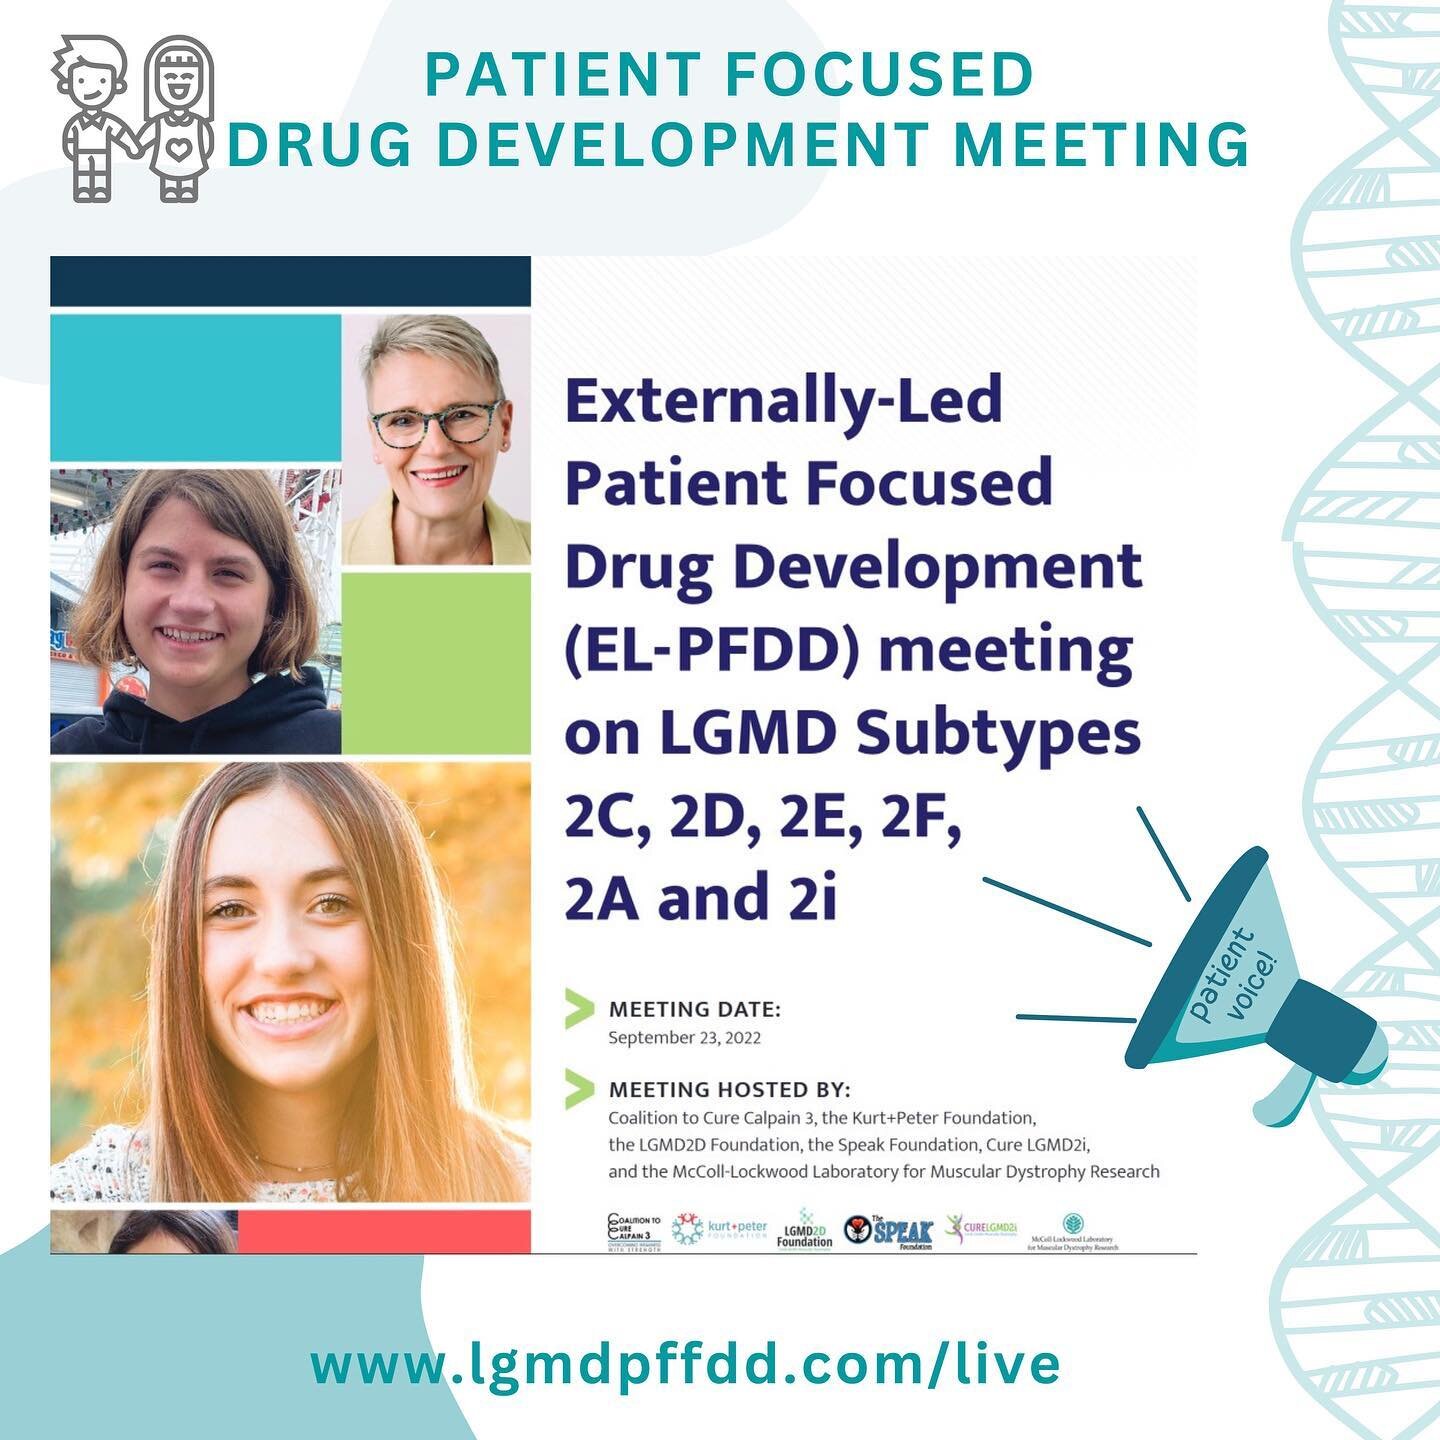 VOICE OF THE PATIENT 📢
Now posted: the collaborative report of patients&rsquo; and caregivers&rsquo; perspectives of living with LGMD our hope for a potential treatment! 📢 #lgmdpfdd 

💬The information in the Voice of the Patient report may be used